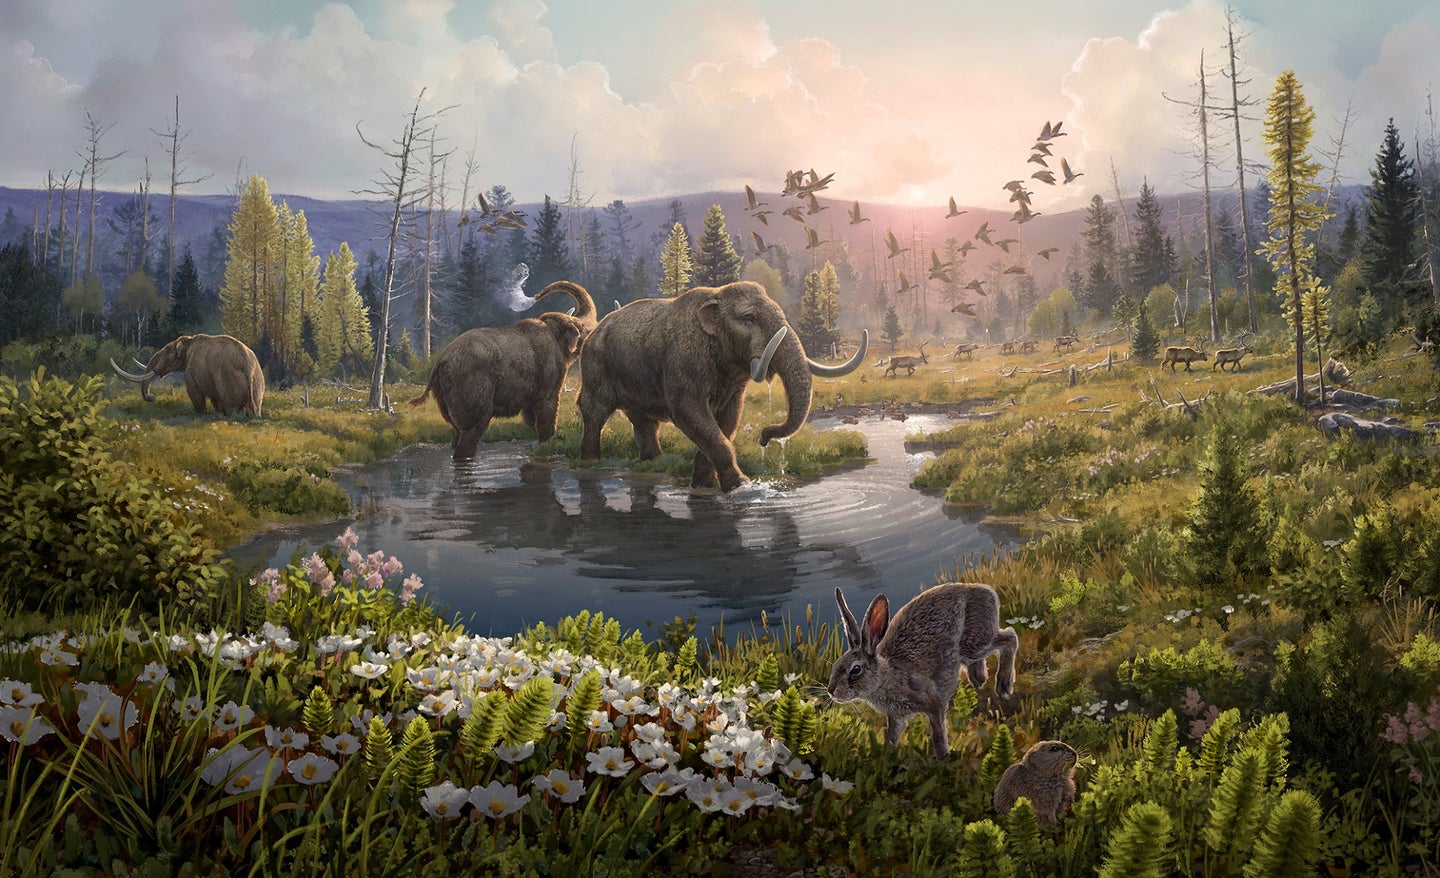 Woolly mammoths in forests in Greenland after eDNA reconstruction. The scene is an illustration.